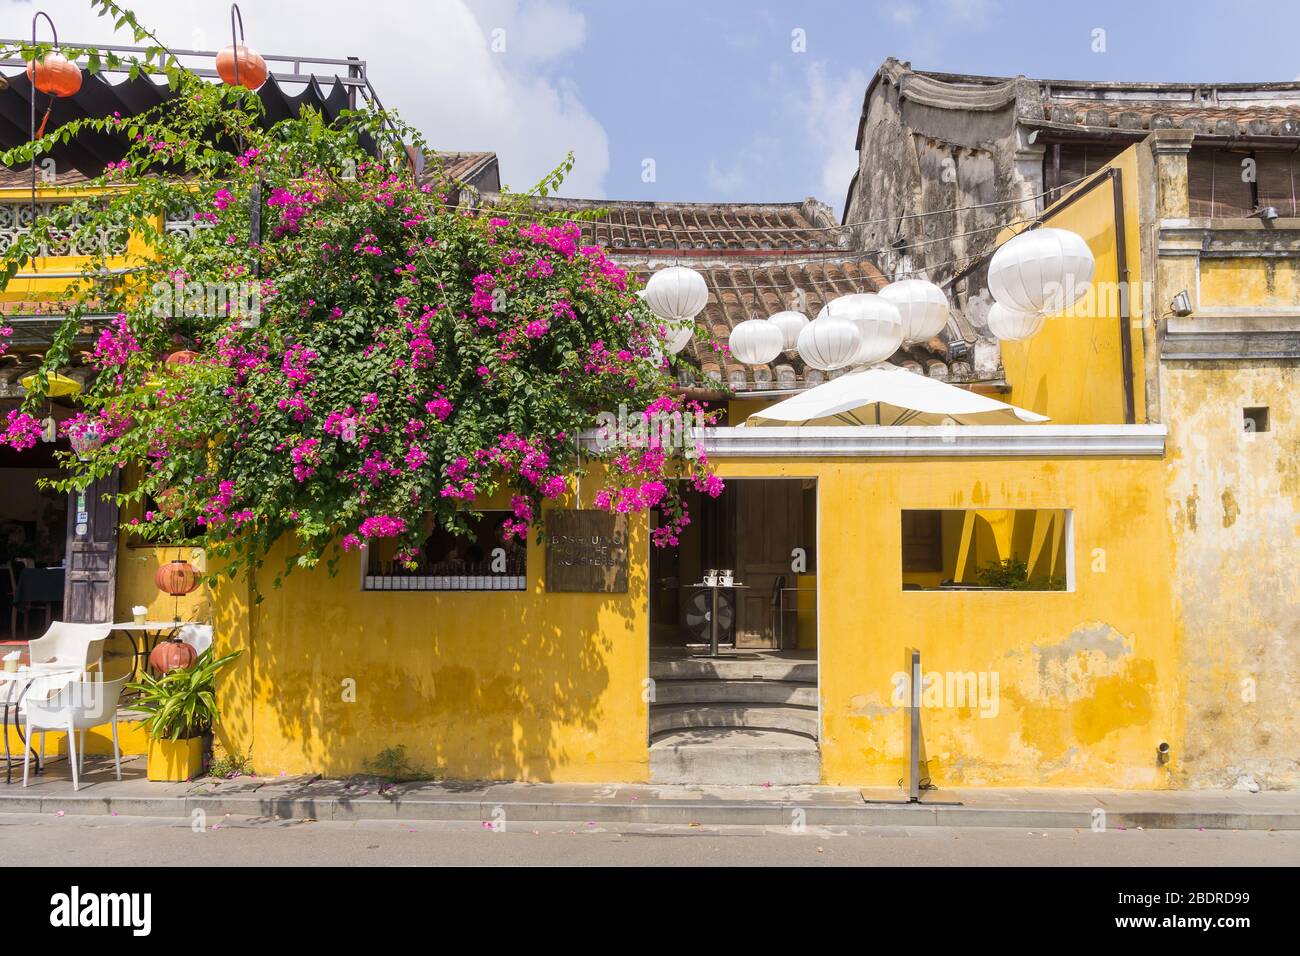 Vietnam Hoi An - One among a lot of yellow houses in Hoi An ancient town, Vietnam, Southeast Asia. Stock Photo